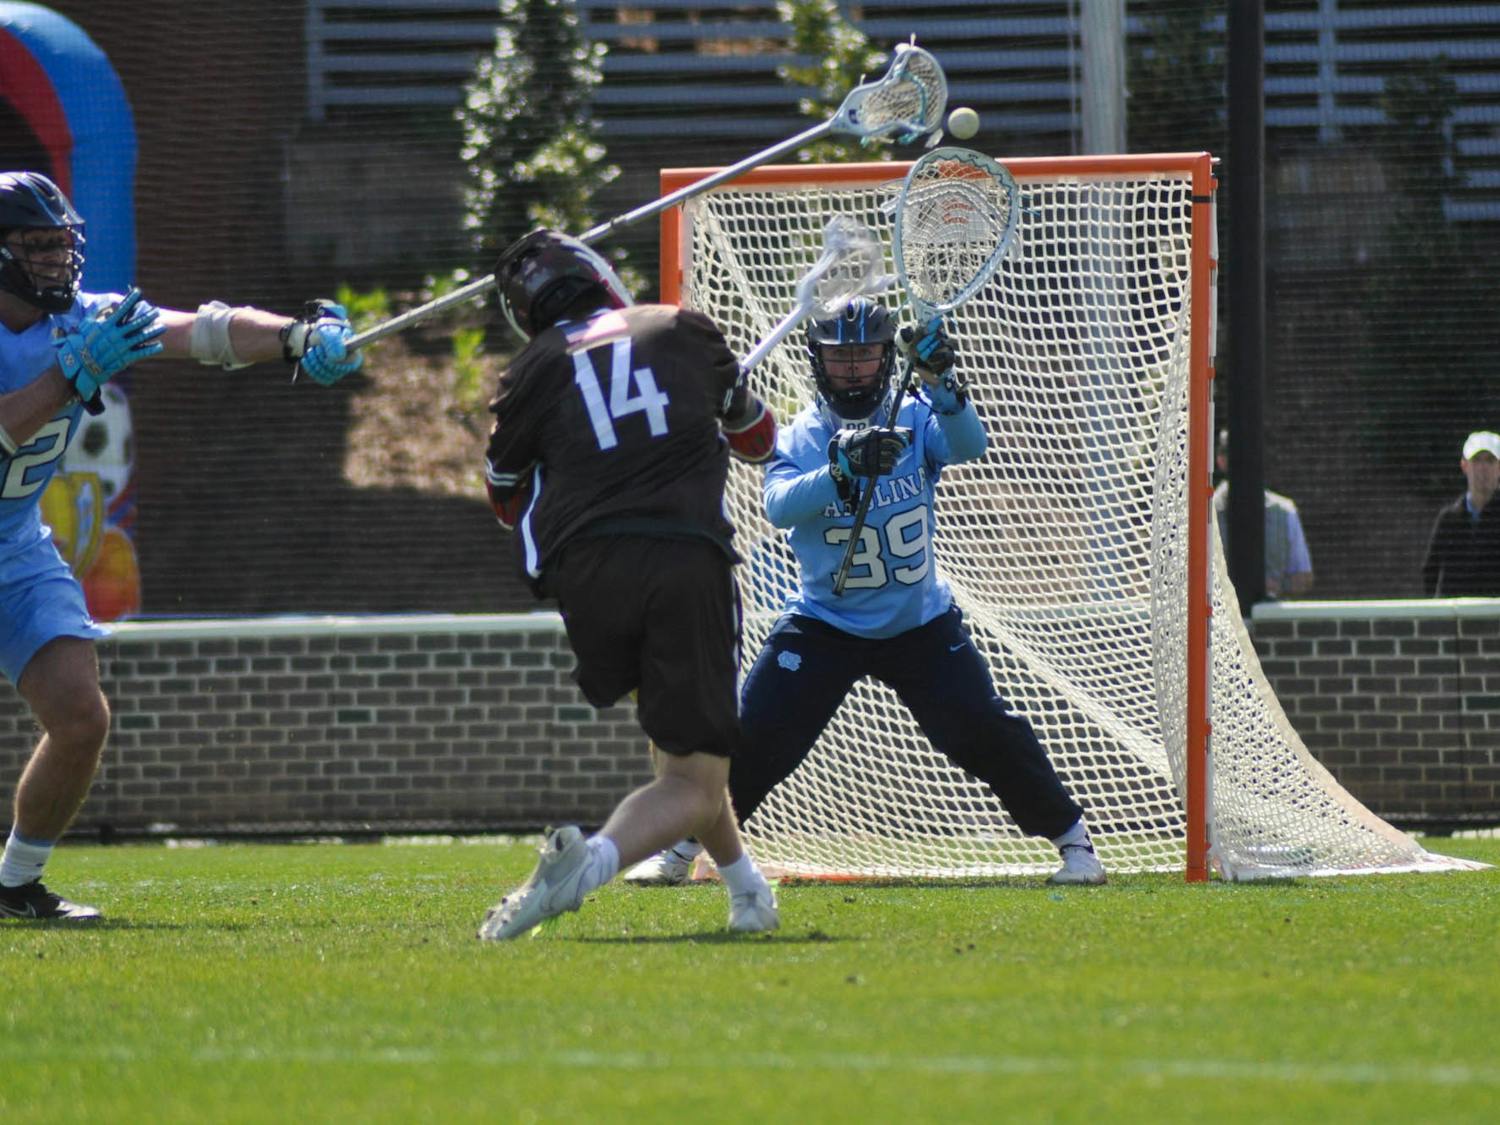 UNC junior goalkeeper Collin Krieg (39) blocks a shot during the men's lacrosse game against Brown at Dorrance Field on Saturday, March 11, 2023. UNC won 19-6.